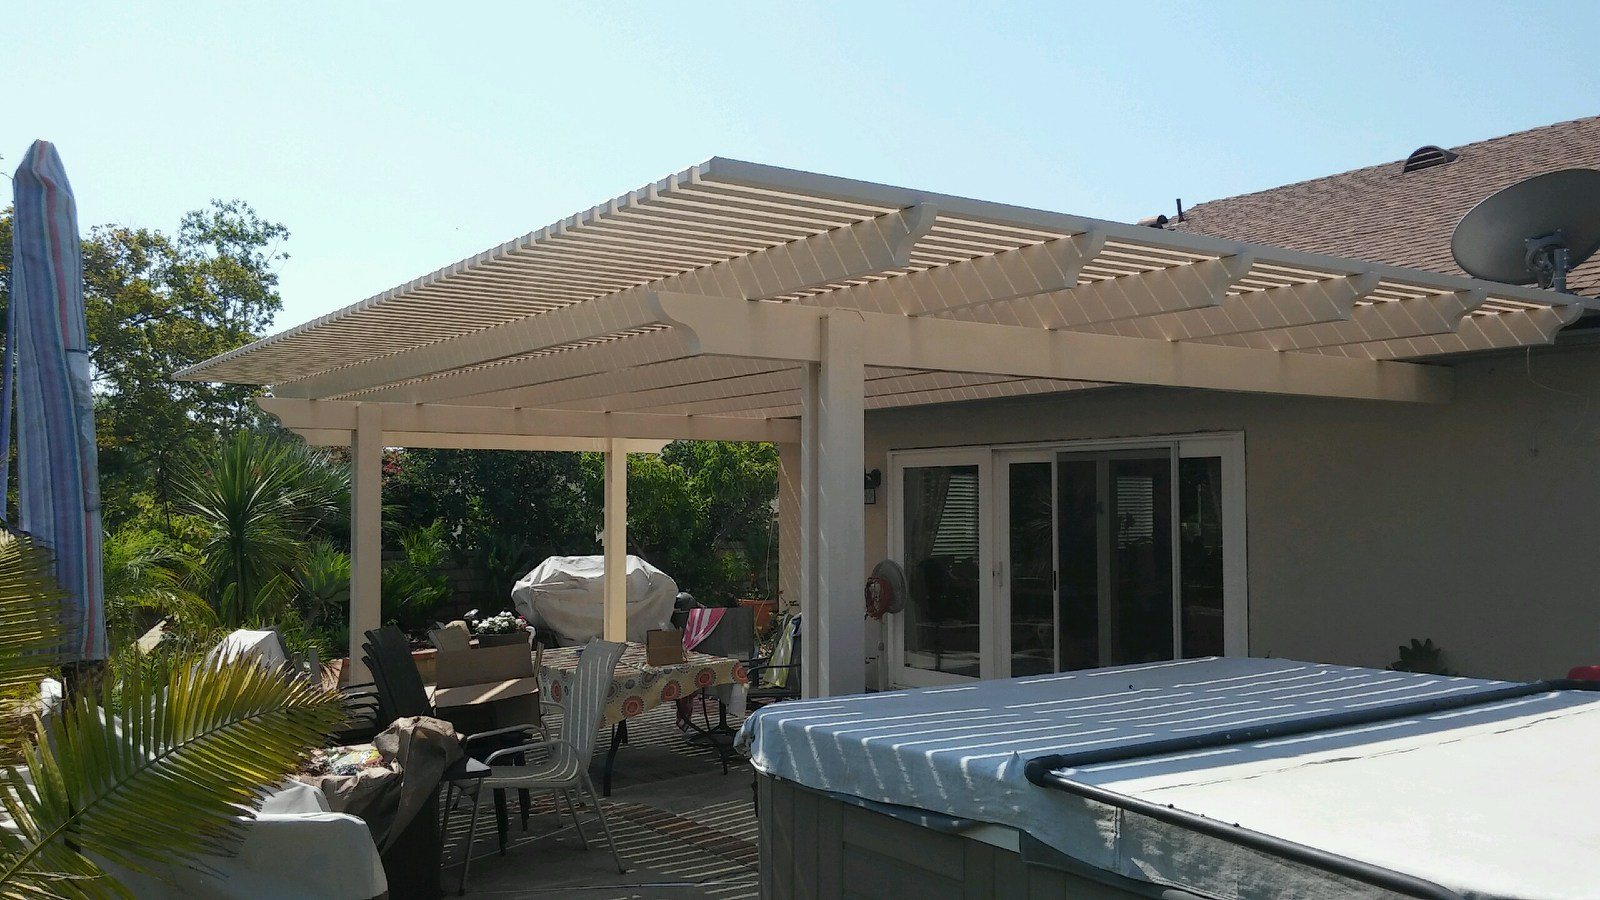 Alumawood Patio Covers Archives The Patio Man pertaining to dimensions 1600 X 900